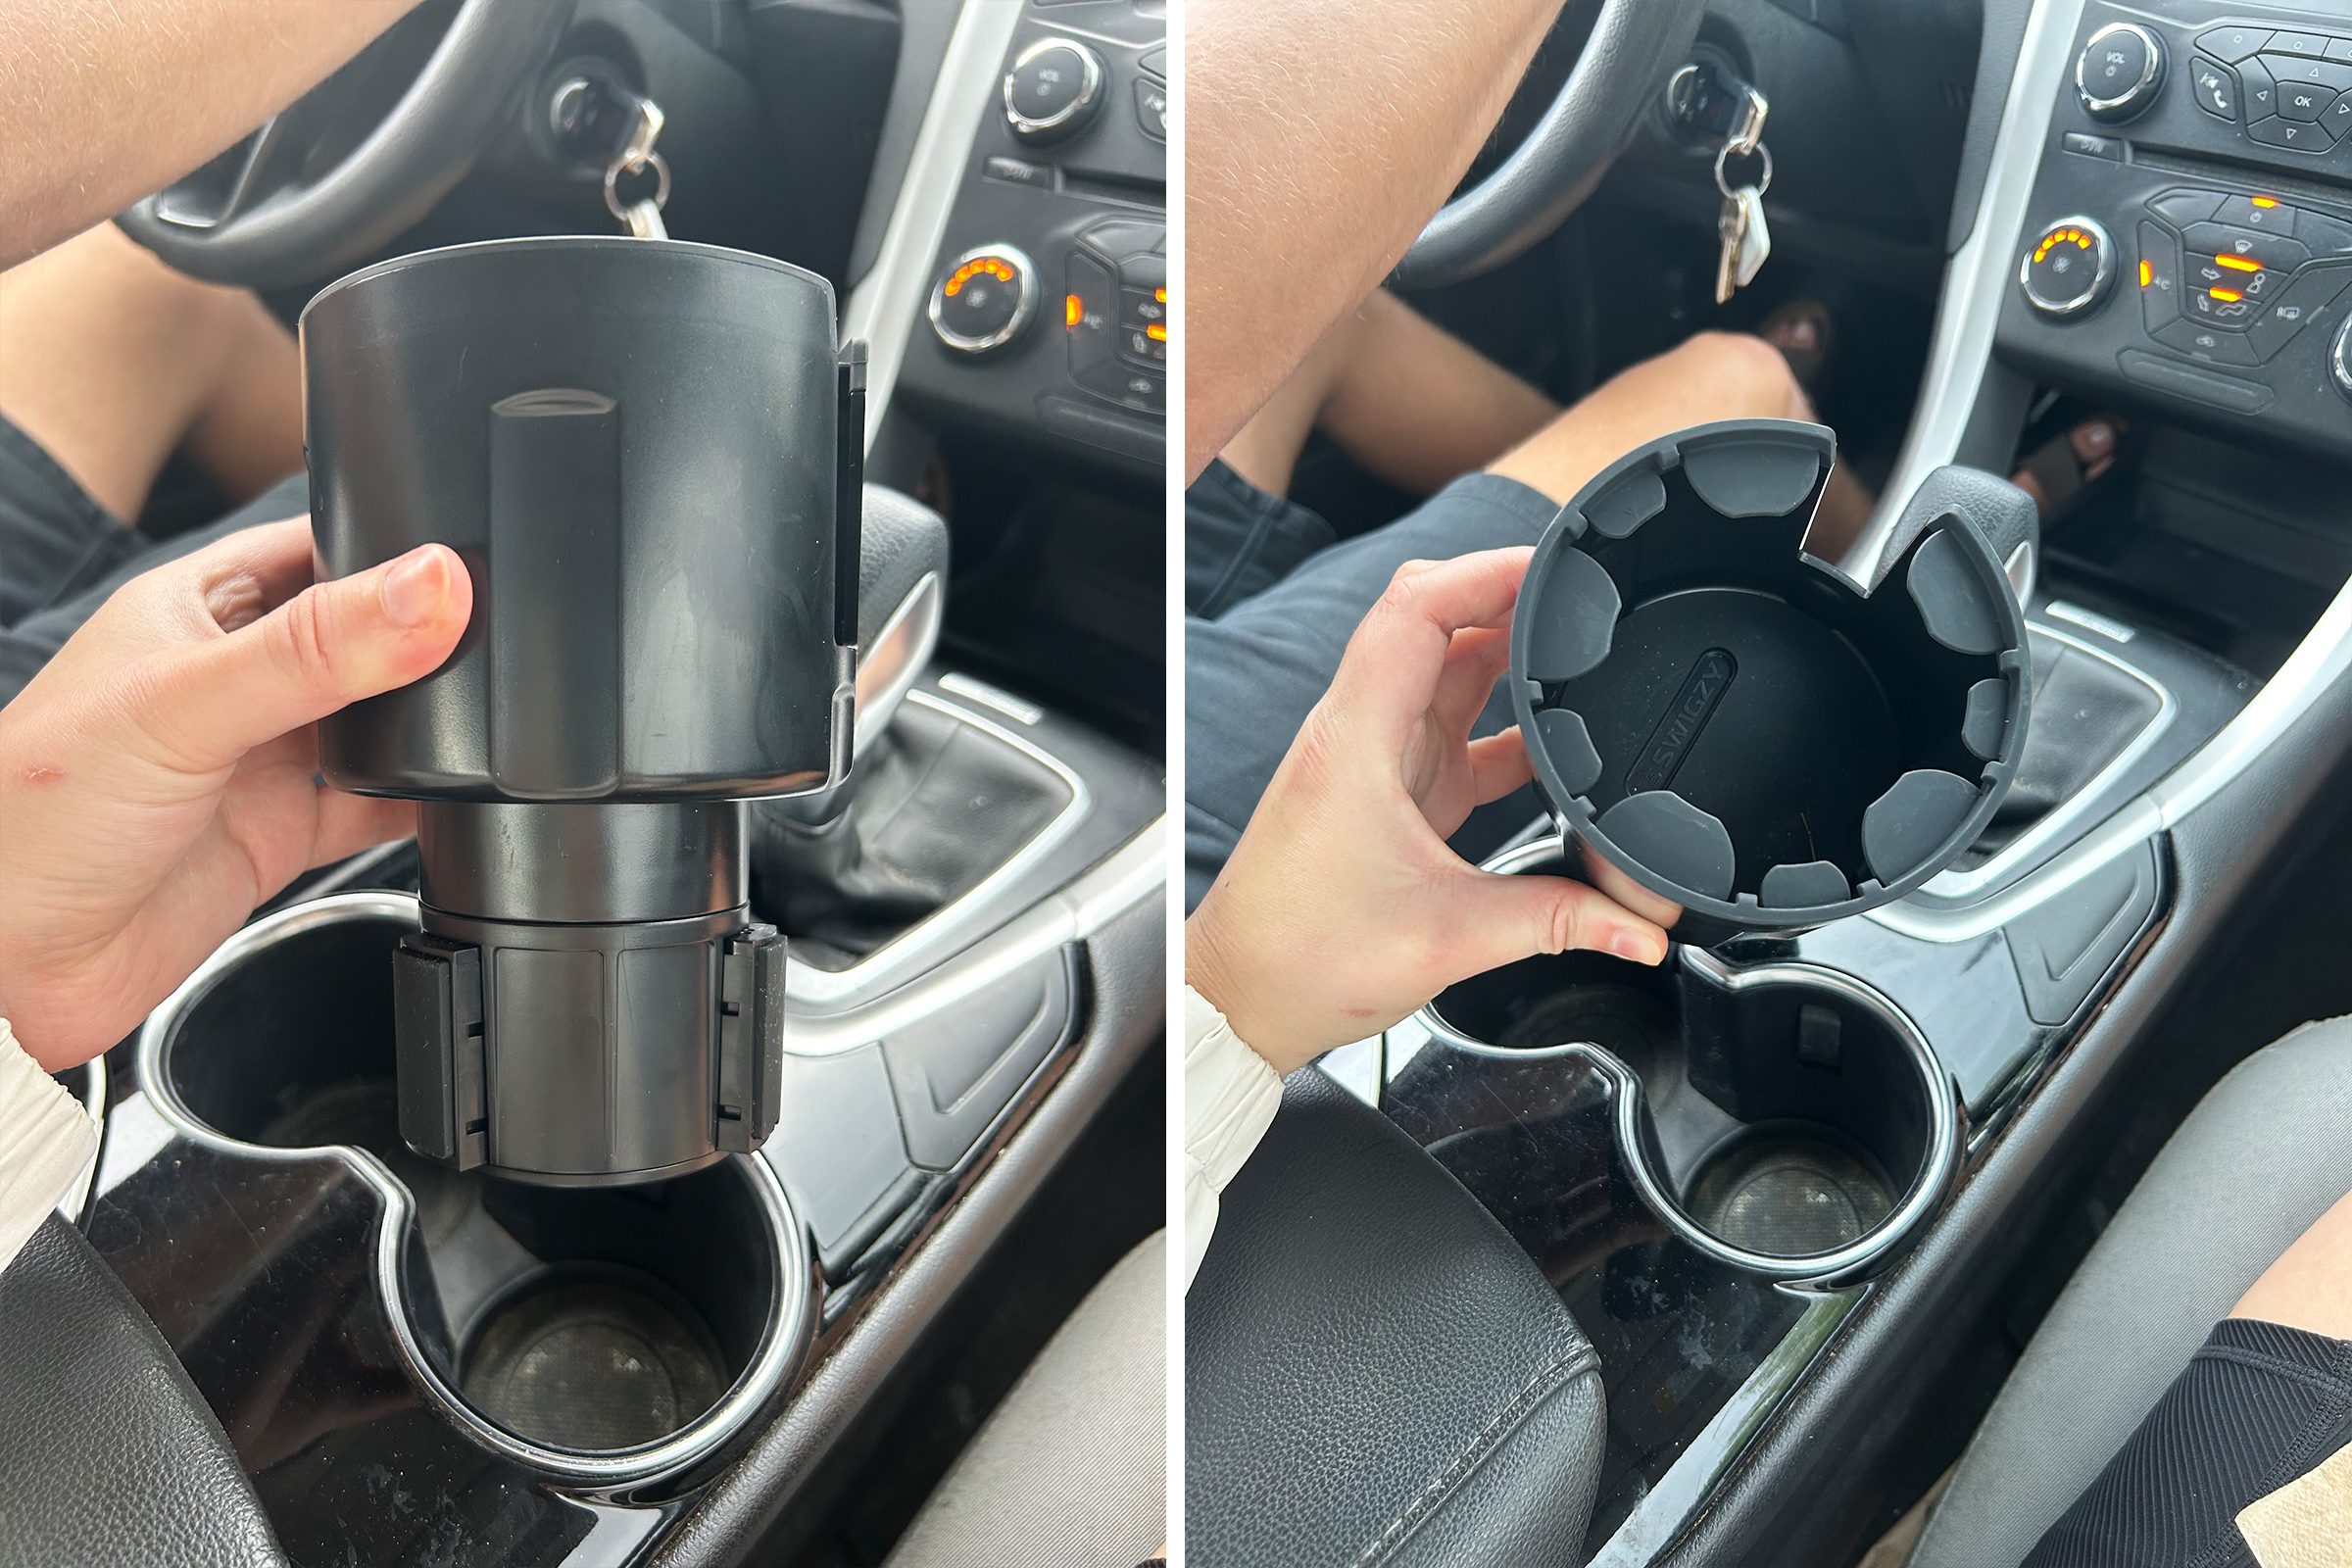 This Car Cup Holder Expander Makes Roadtrips So Much Better